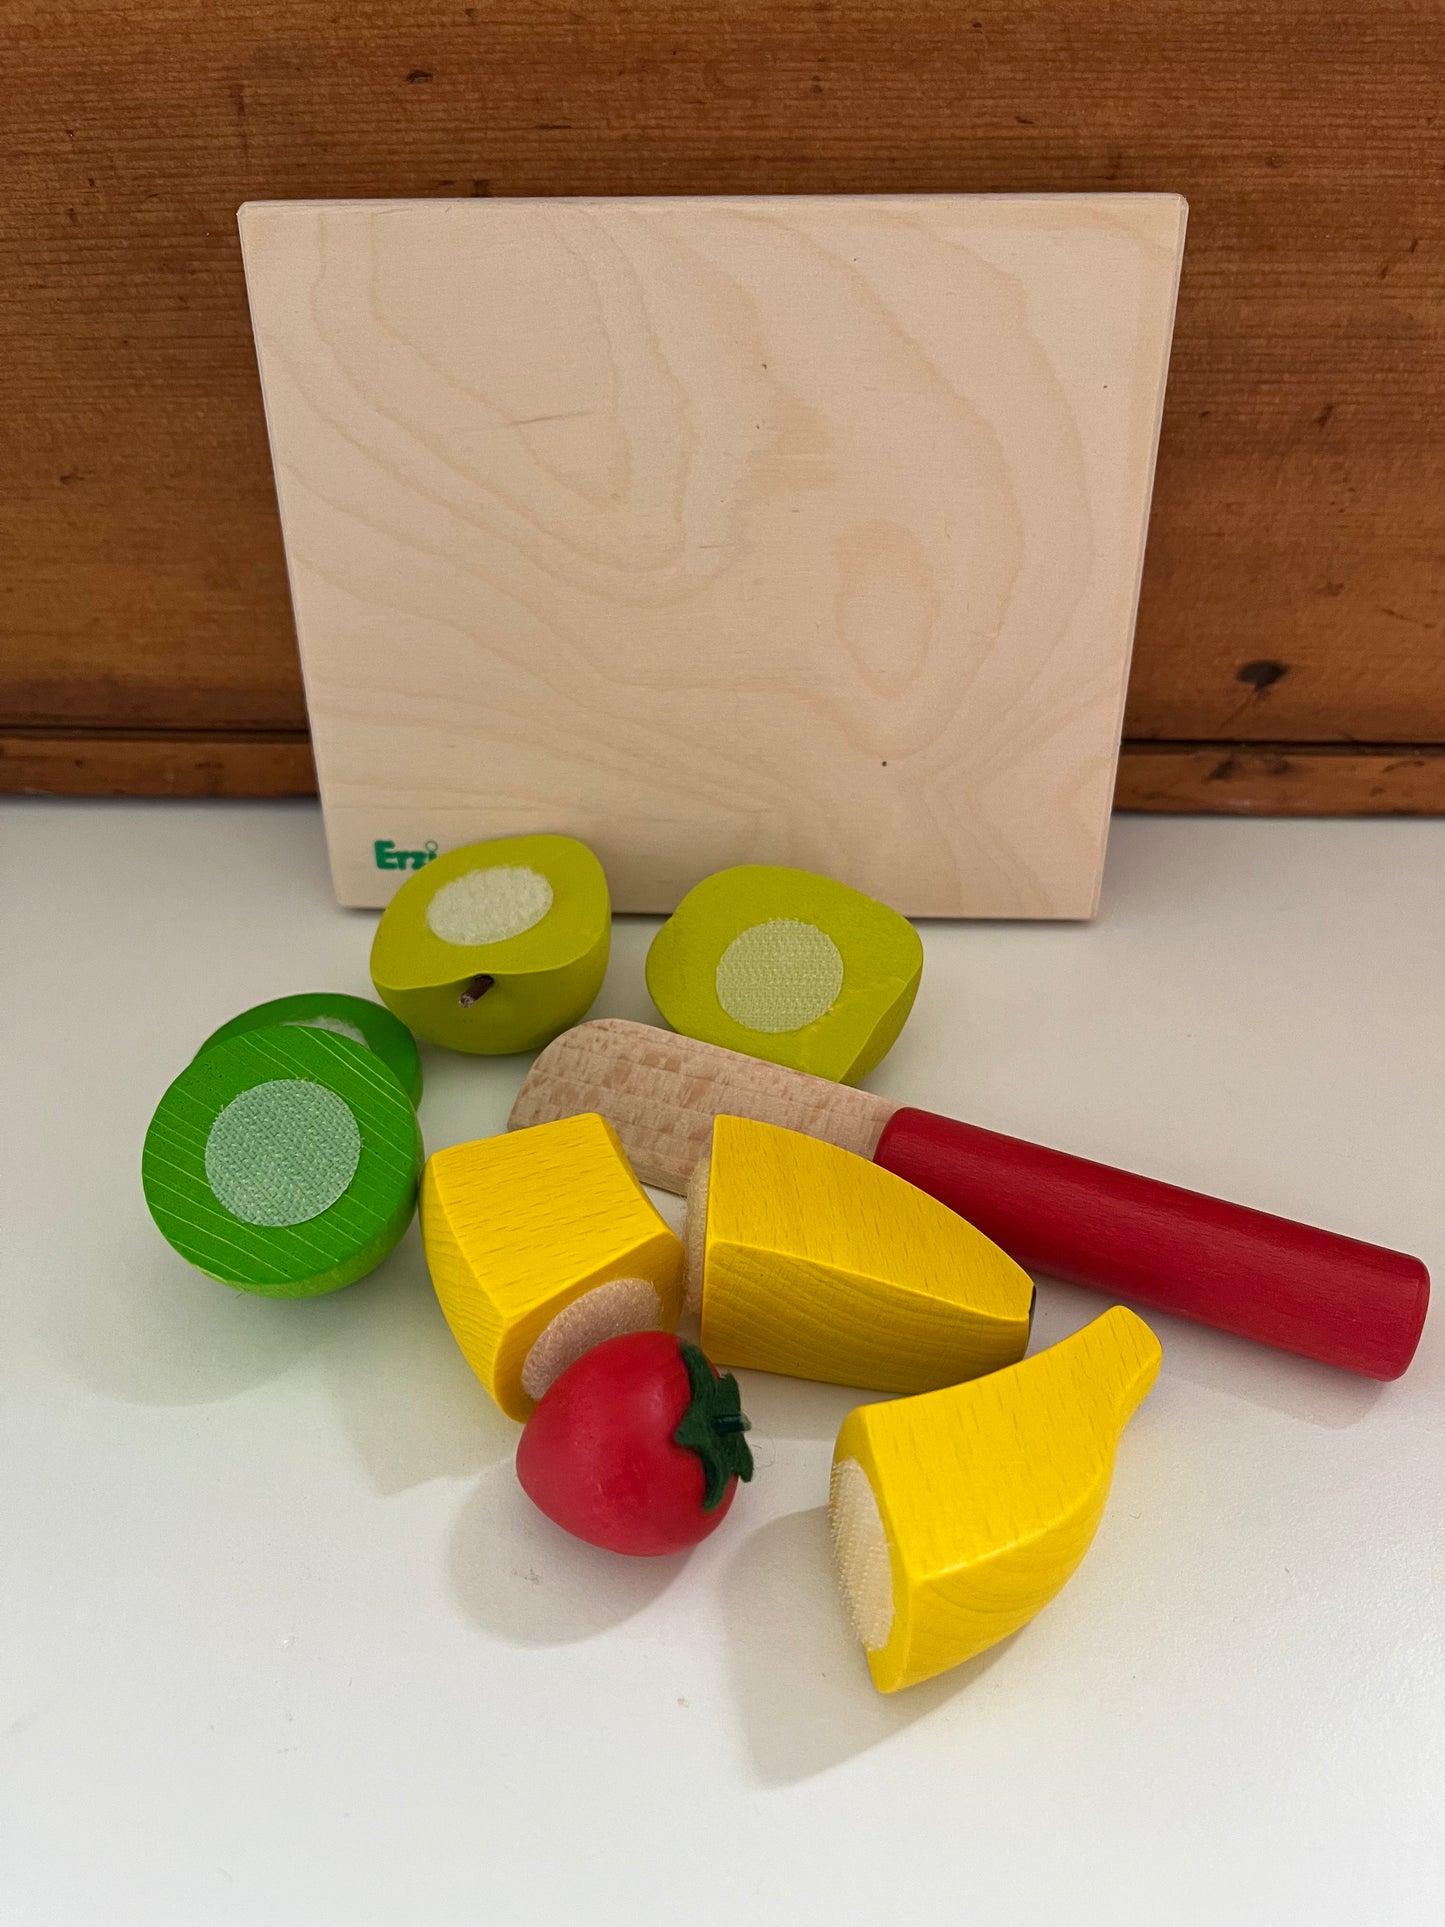 Kitchen Play Food - Wooden FRUIT-To-SLICE Set, with KNIFE & BOARD... 4 fruits!